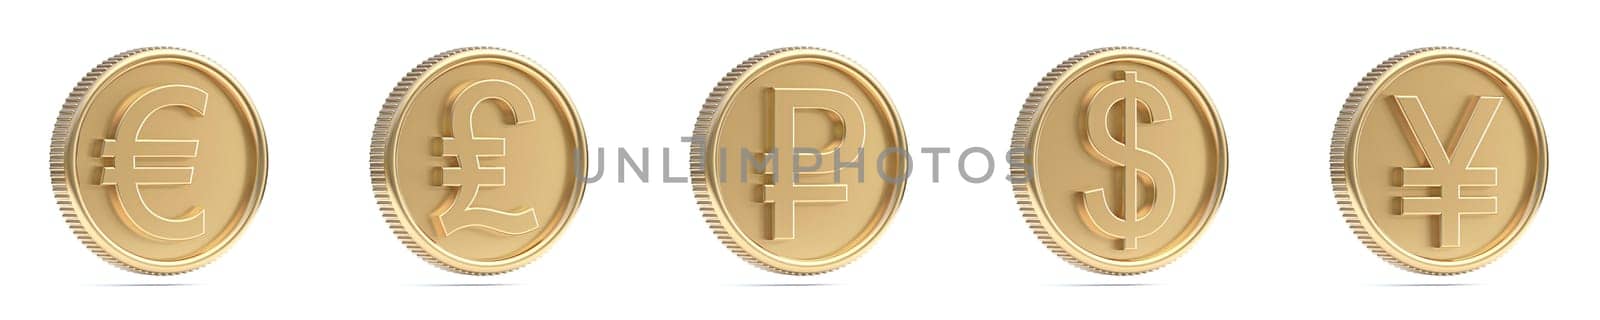 Golden coins currencies signs 3D rendering illustration isolated on white background